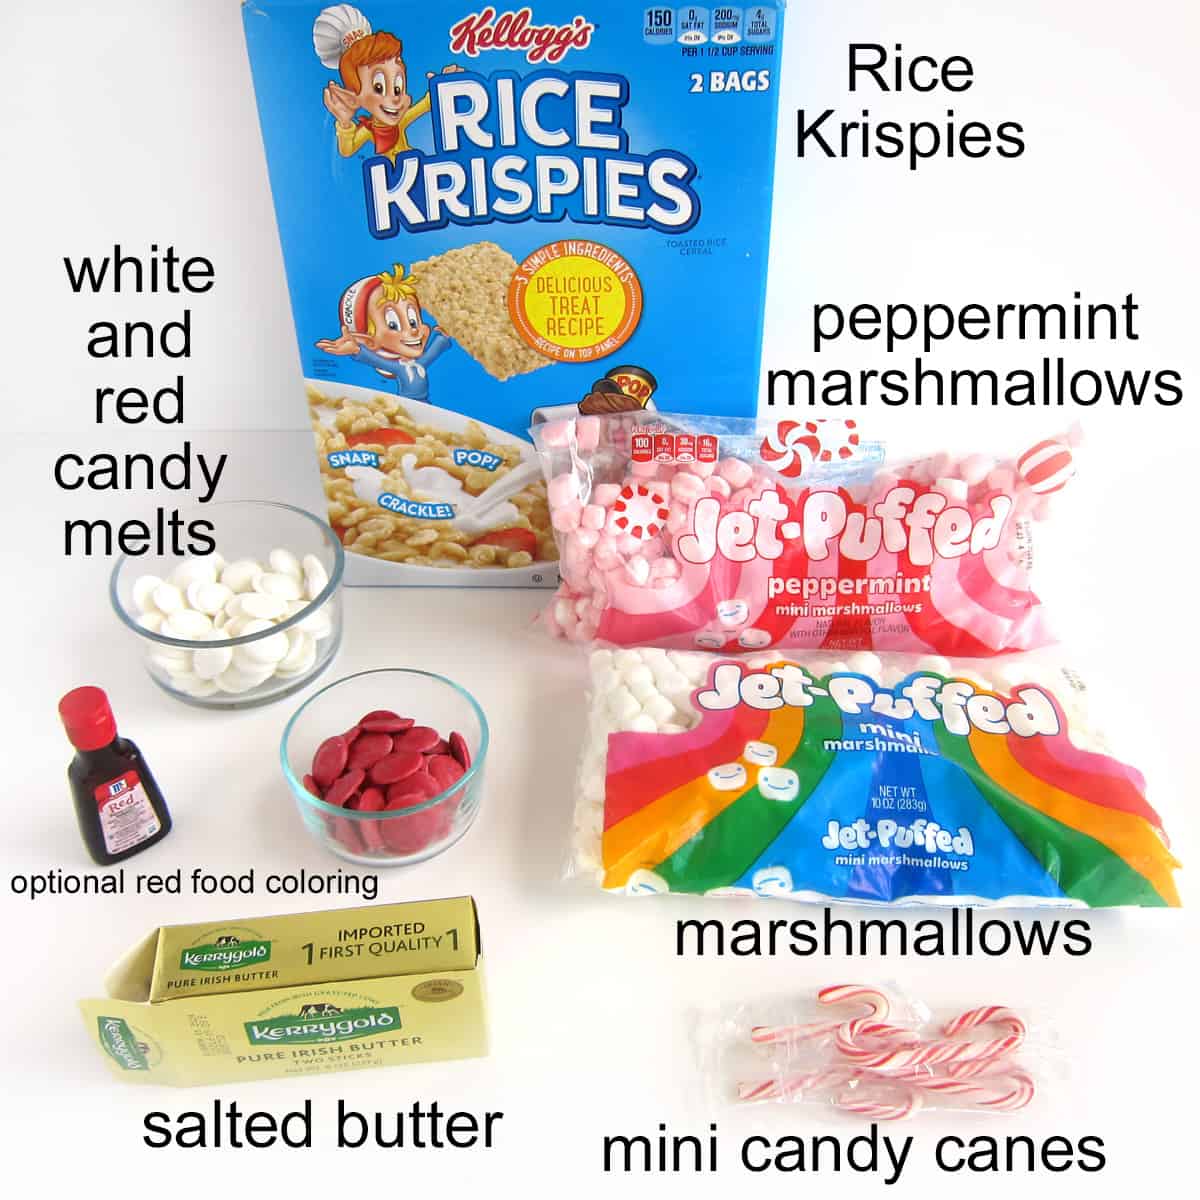 Rice Krispie treat candy cane ingredients including Rice Krispies, peppermint and regular marshmallows, mini candy canes, butter, red and white candy melts, and red food coloring.